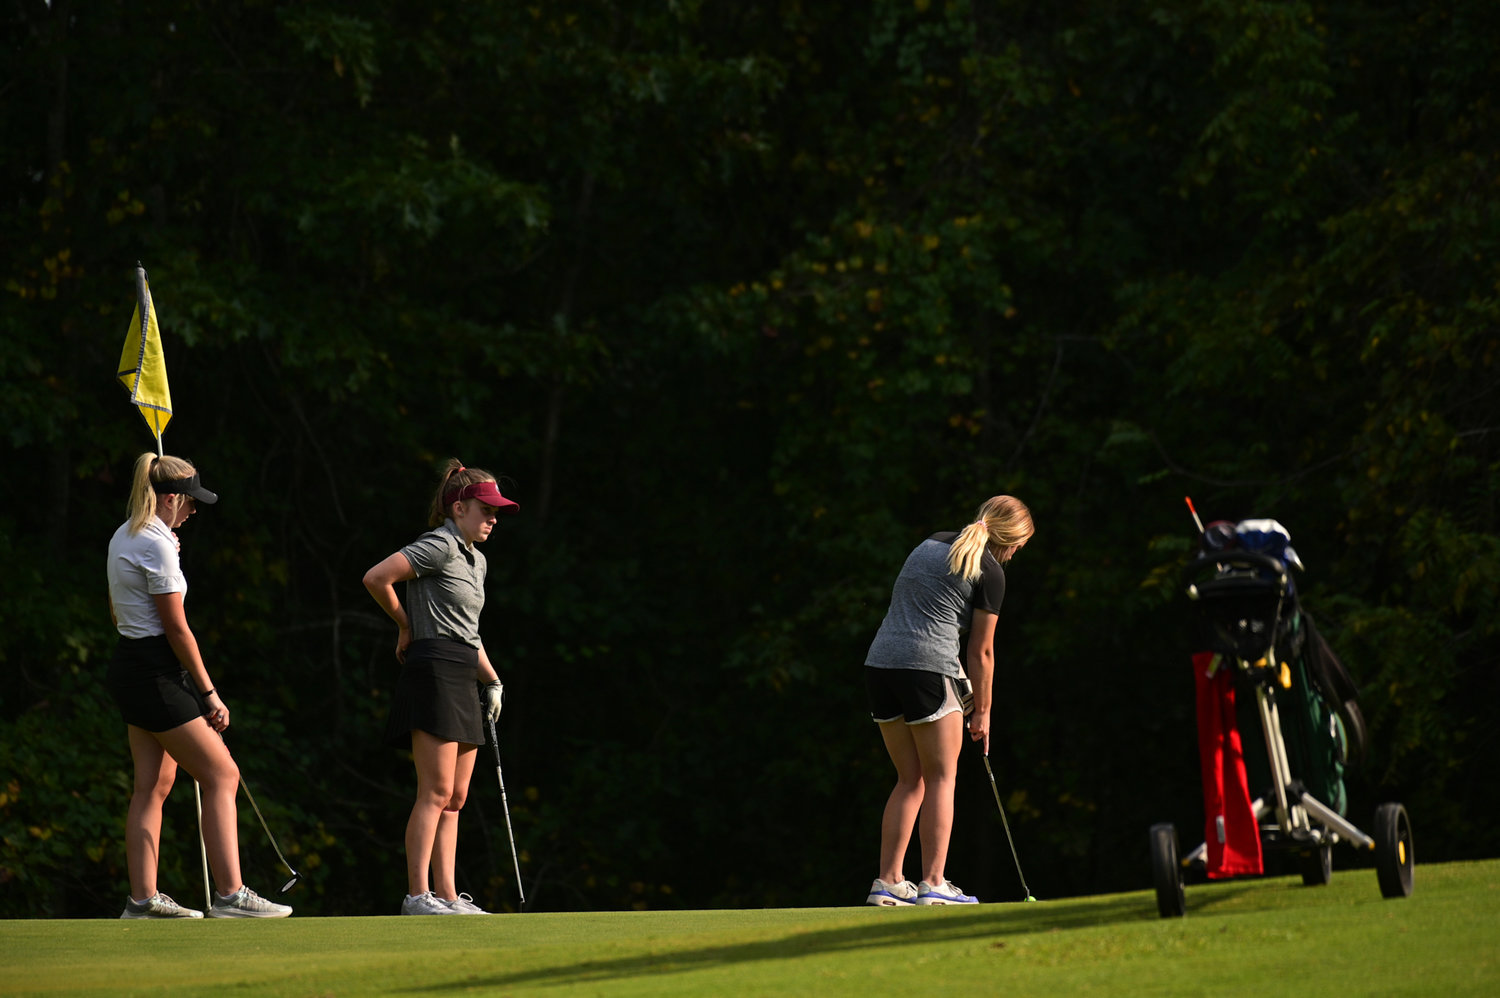 The Seaforth girls golf team finished second Monday at a conference meet with North Moore and Chatham Central.